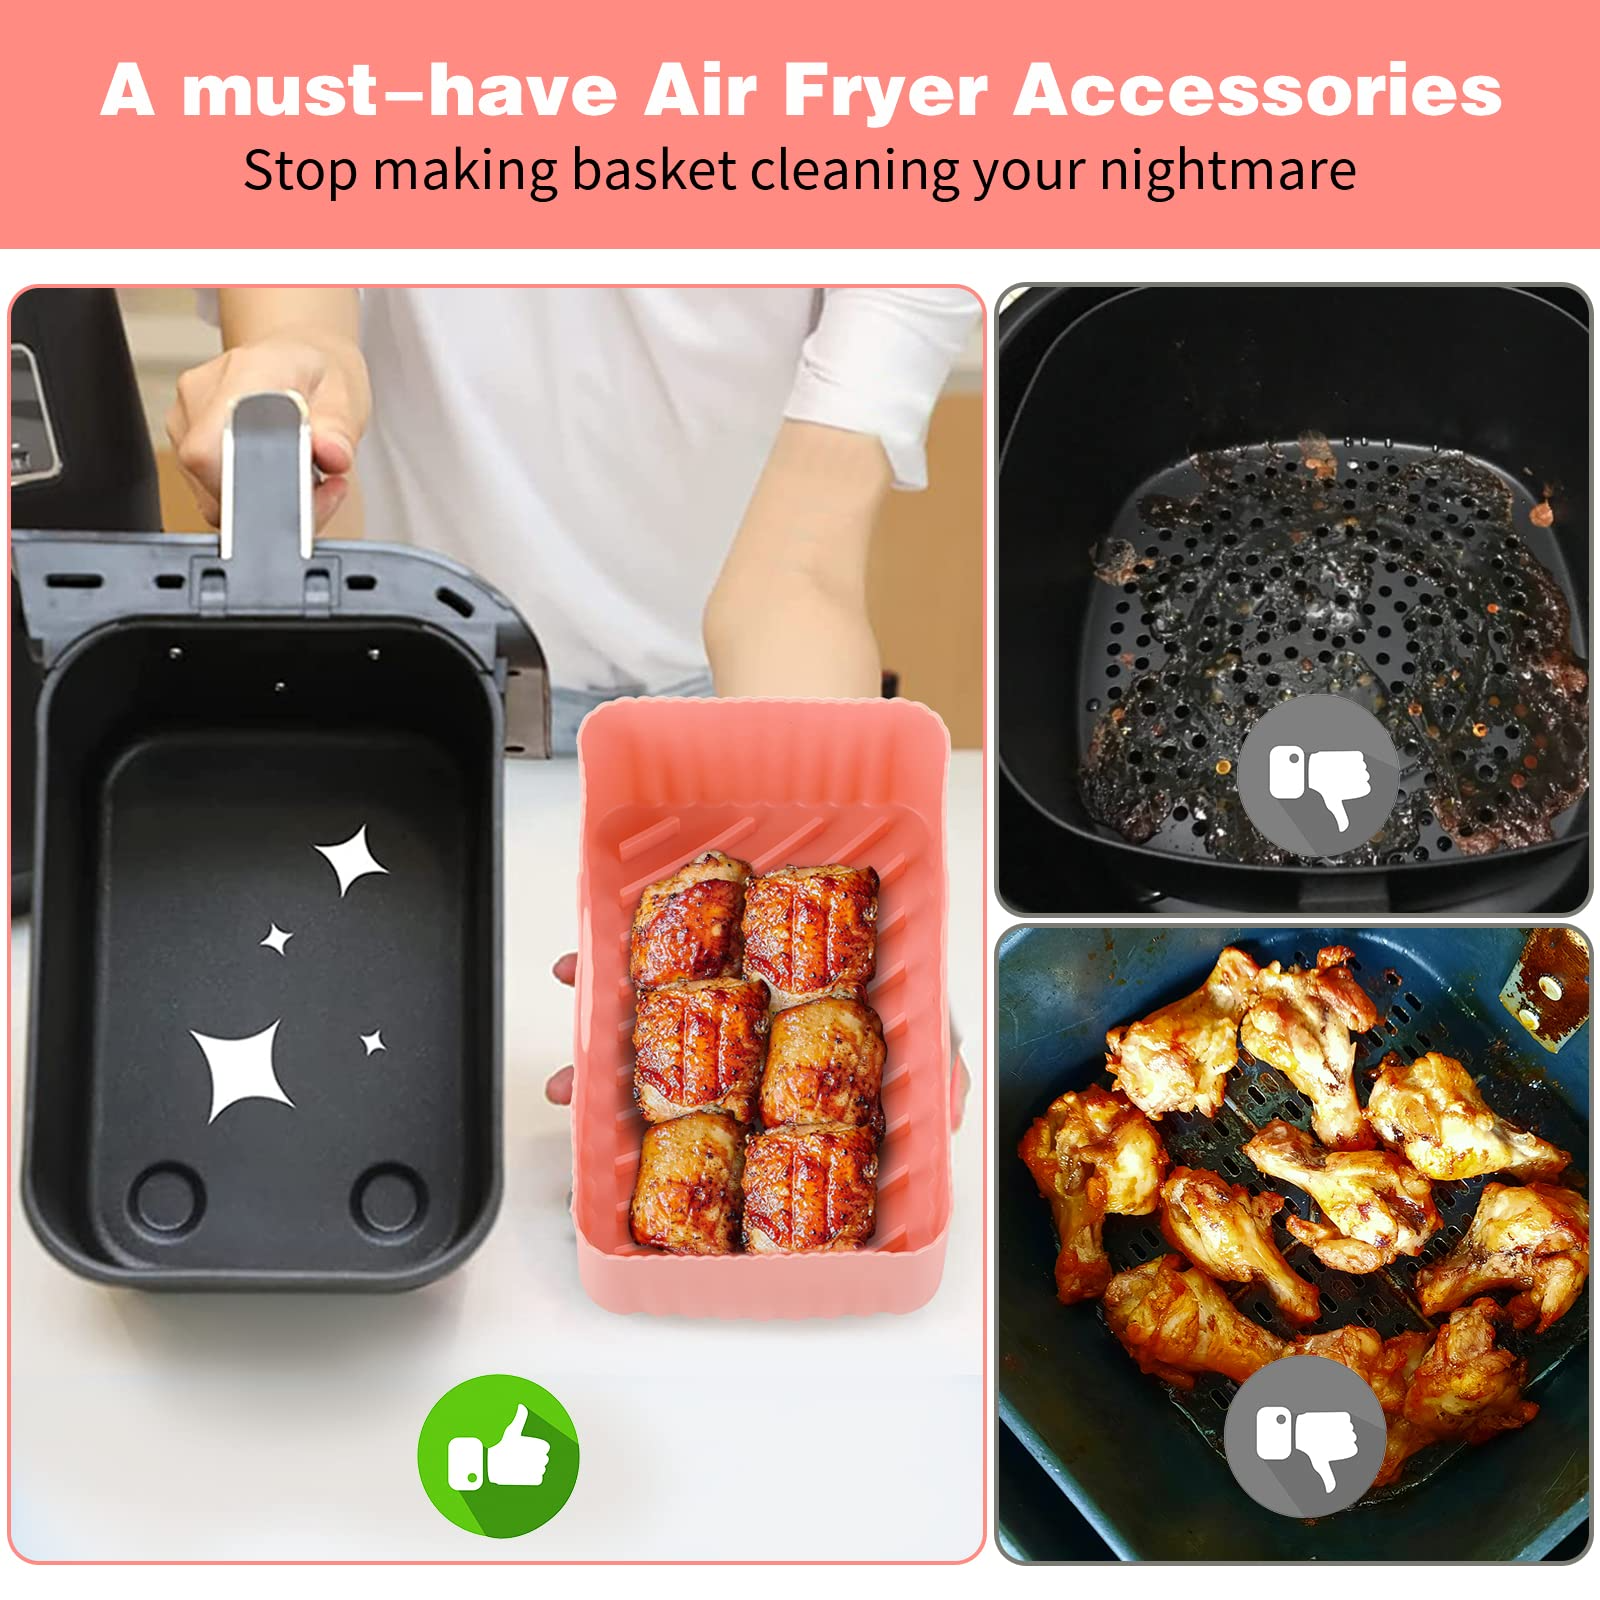 2-Pack OUTXE Square Silicone Air Fryer Liners 8 inch for 4 to 6 QT Reusable  Air Fryer Pot Air Fryer Inserts for Oven Microwave Accessories